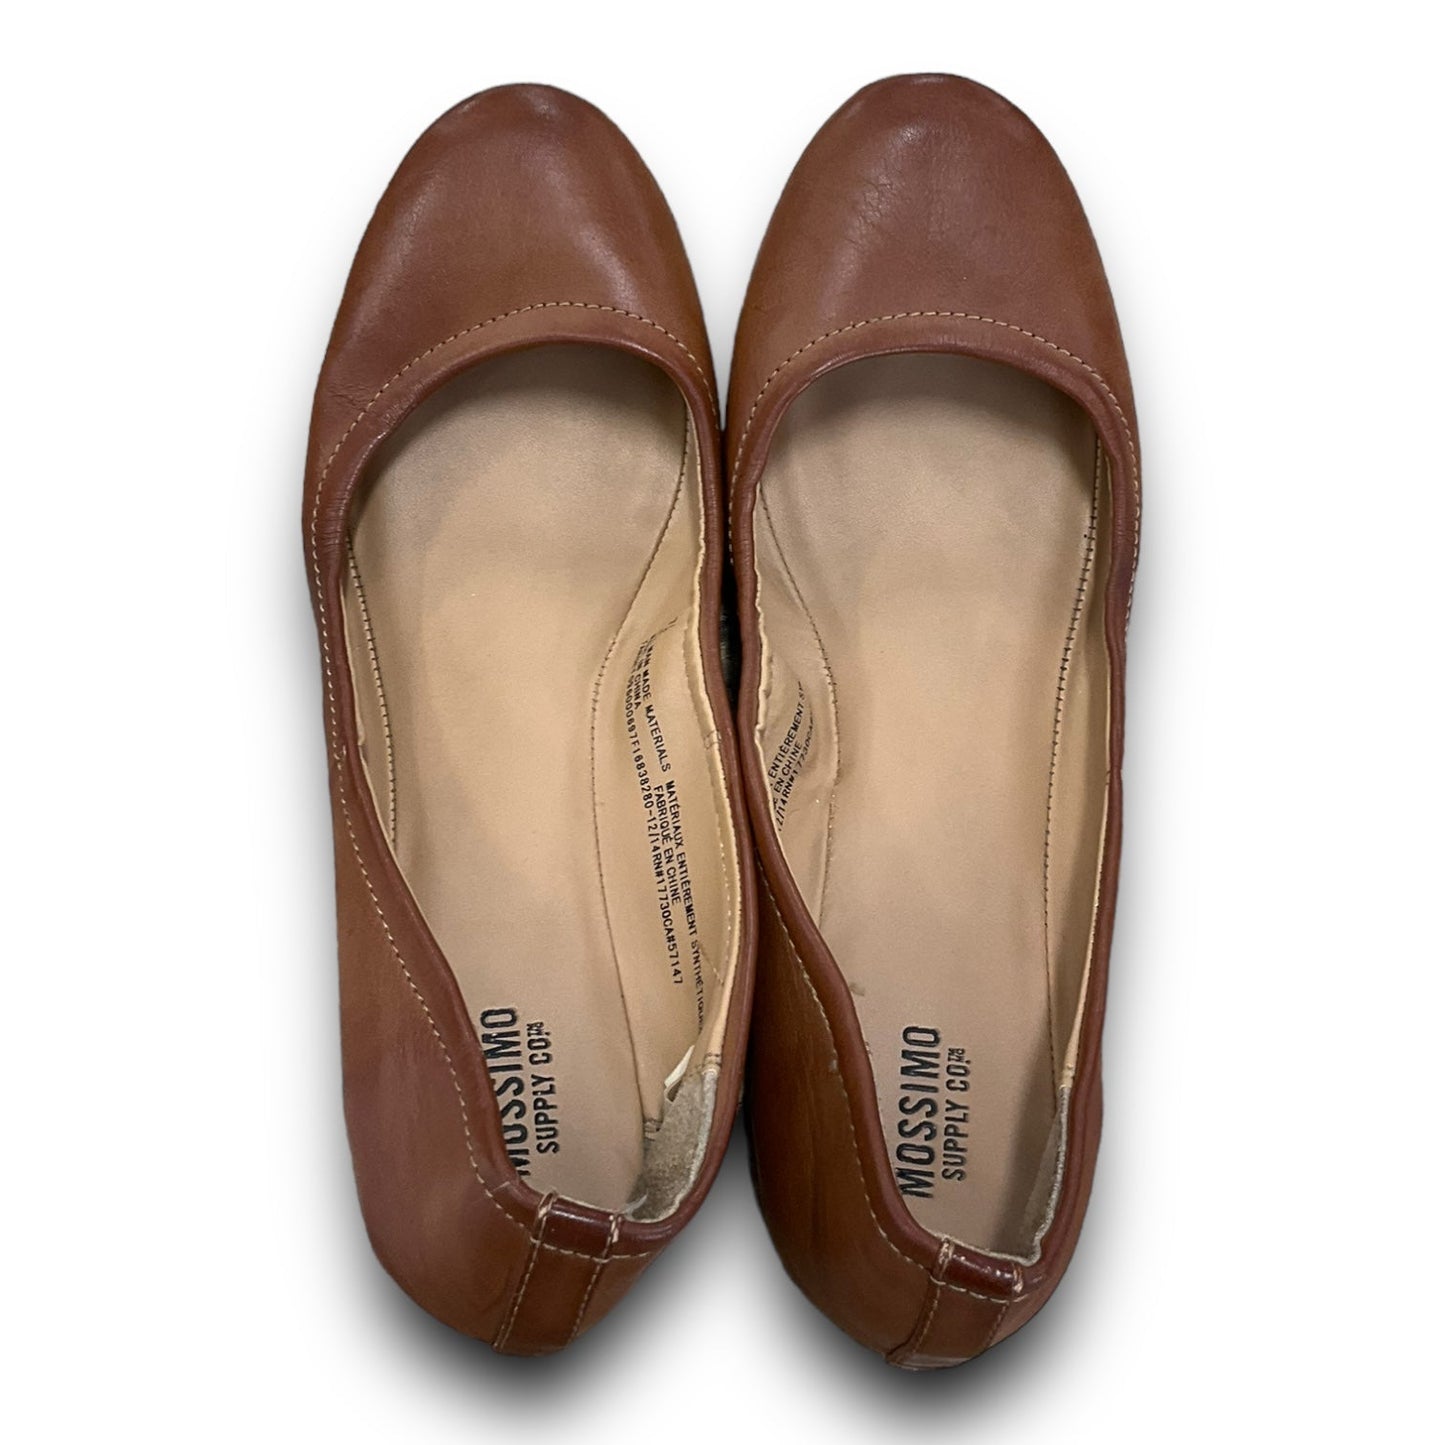 Brown Shoes Flats Mossimo, Size 7.5